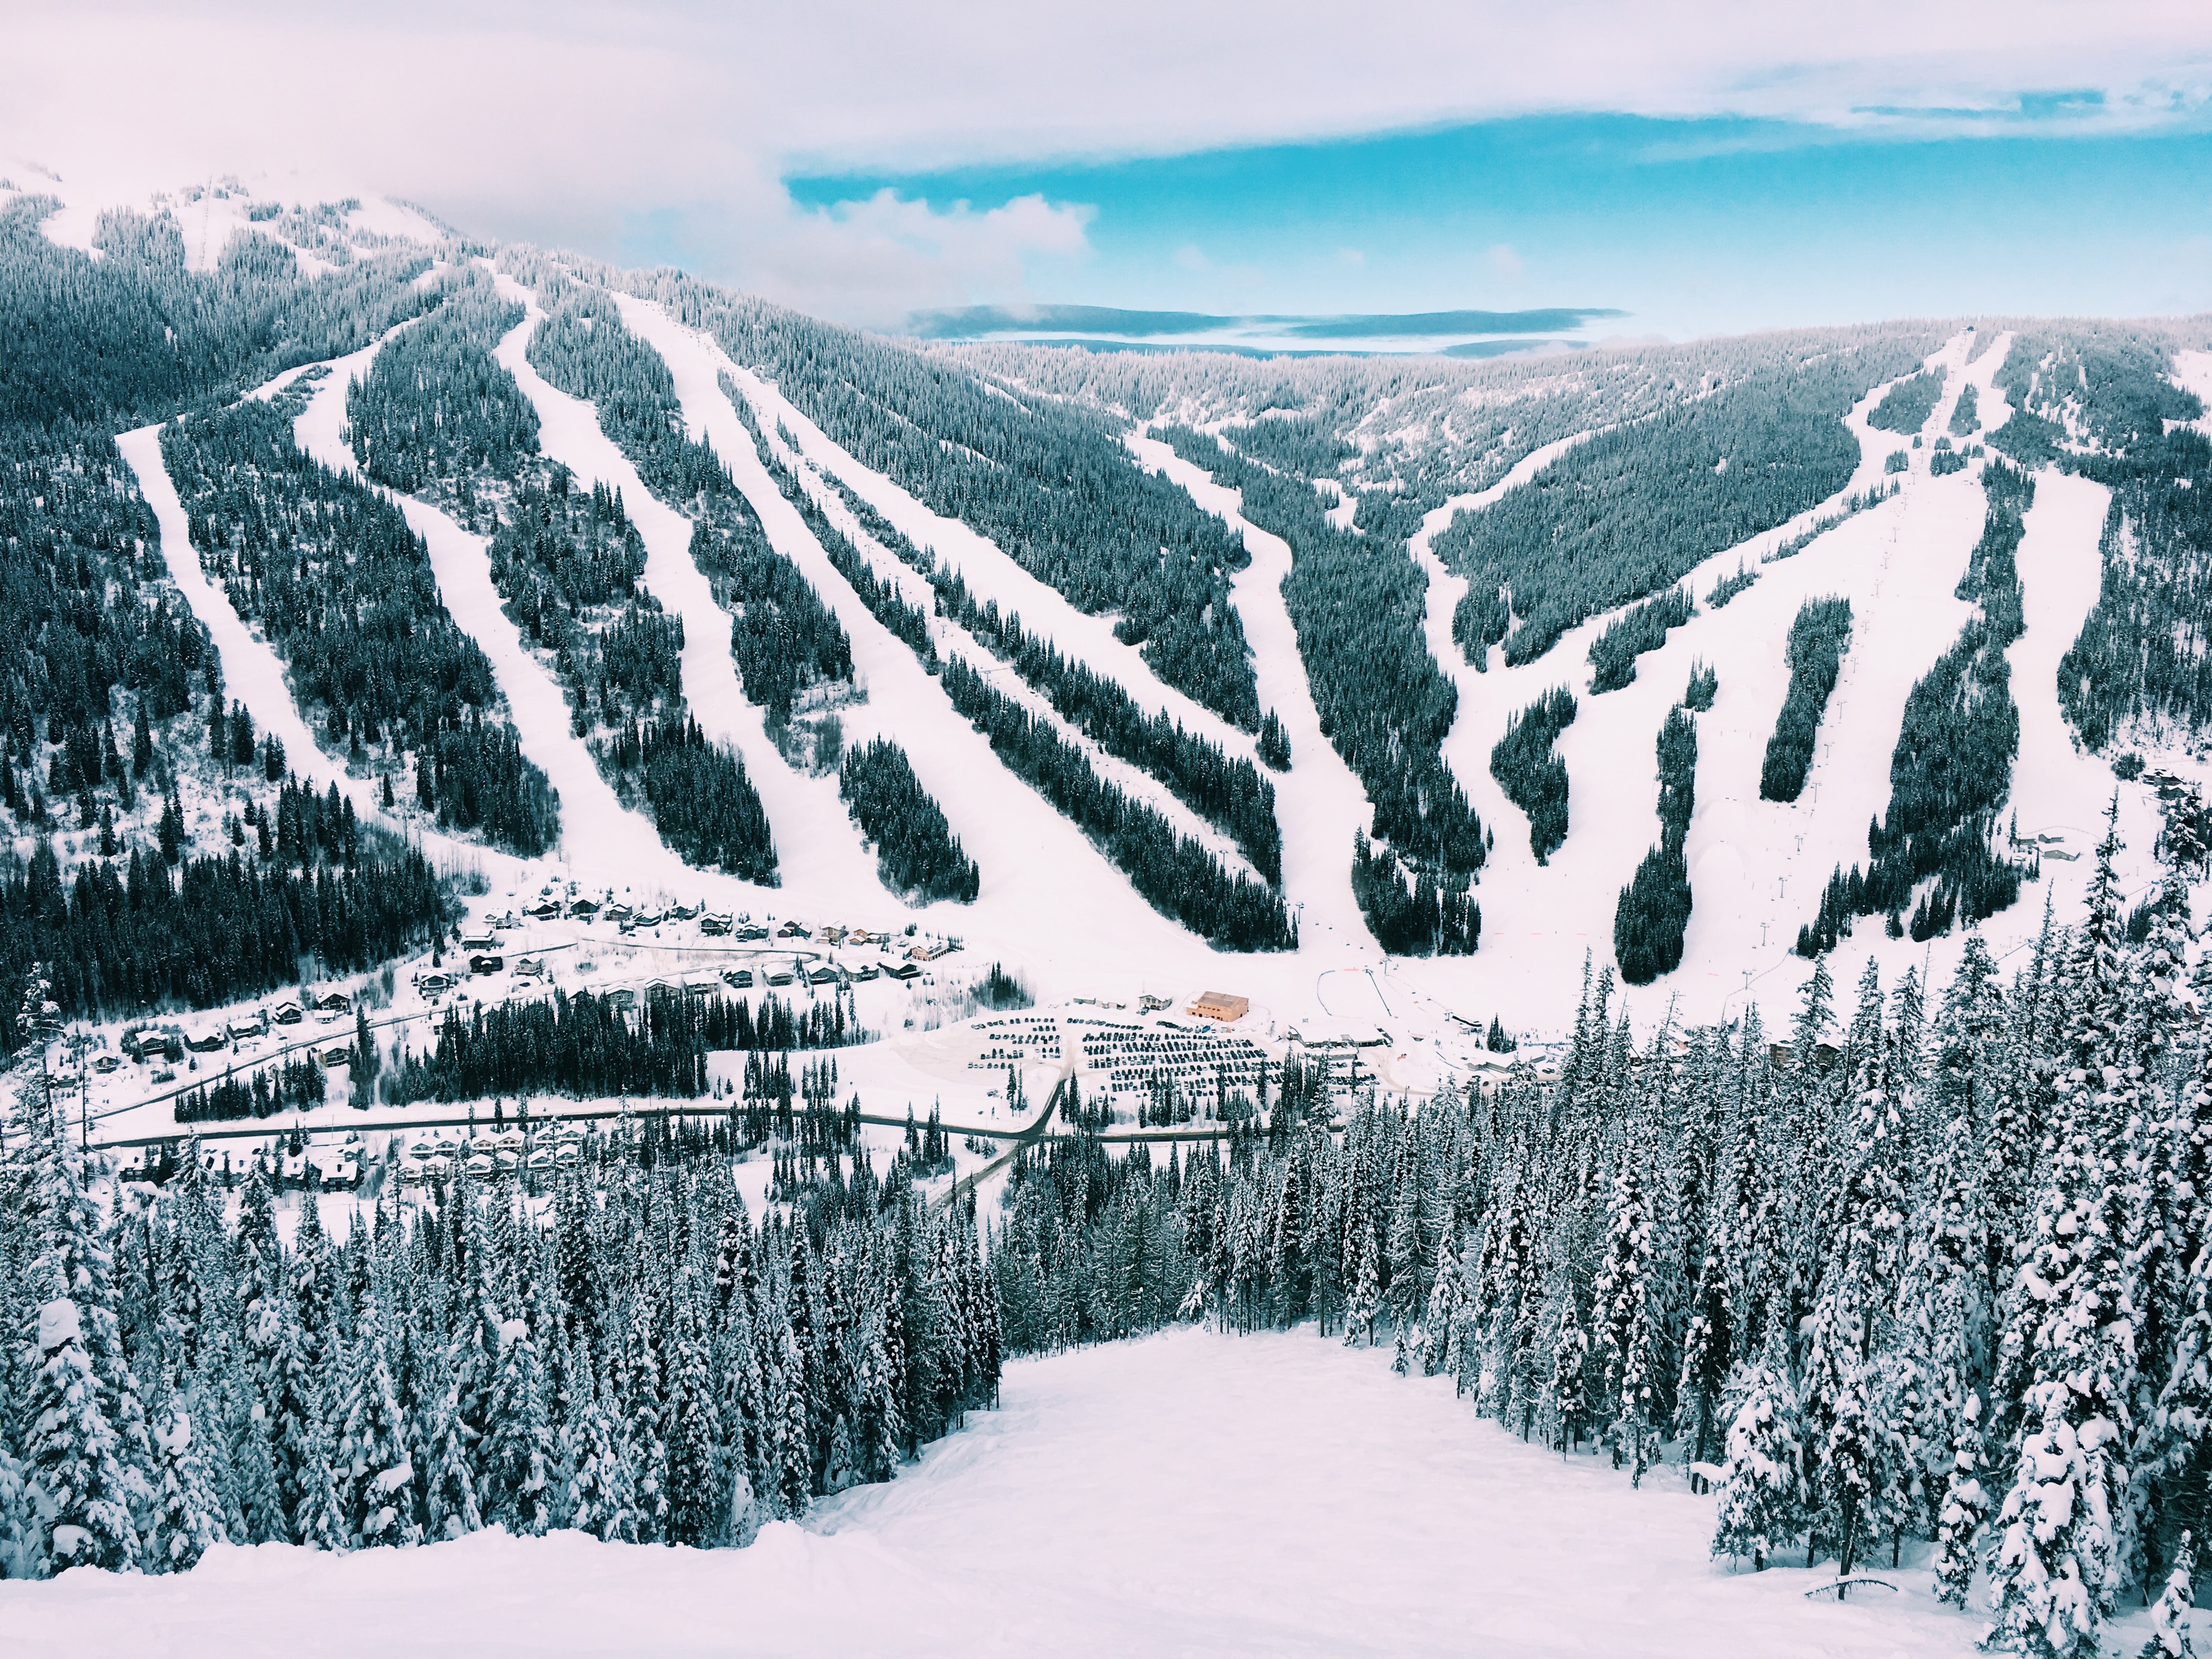 9 Ways to Ski for Less this Winter: Cheap or Free Lift Tickets